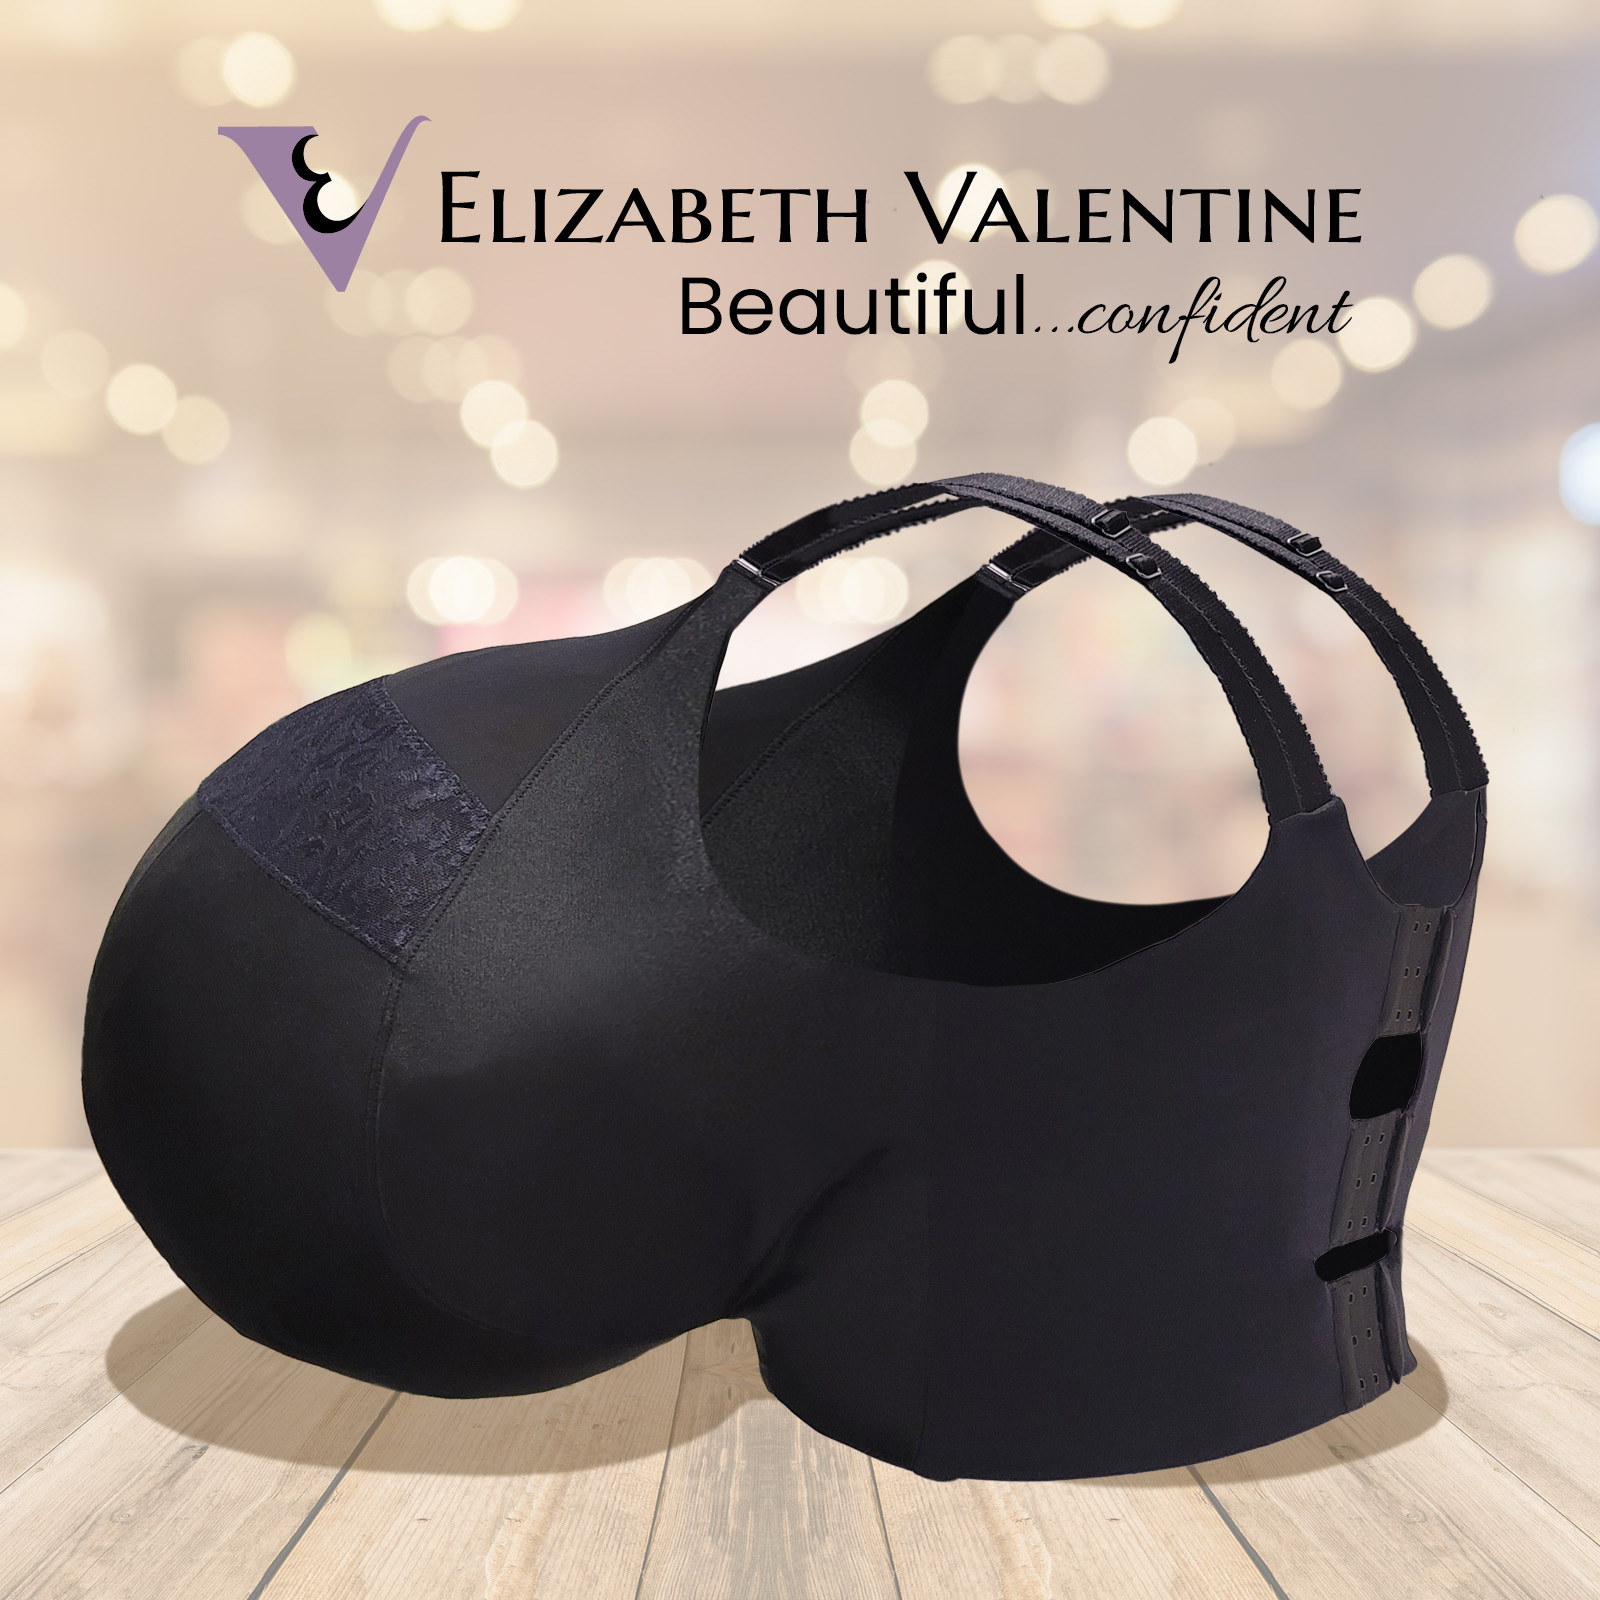 Shop Underwire Bras Made in Canada, Cup Sizes AAAA to ZZZZ Bands 24+ DDDD+  - Shop - Elizabeth Valentine - Canadian Bras - Bands 24 - 64 - Cups AA - Z